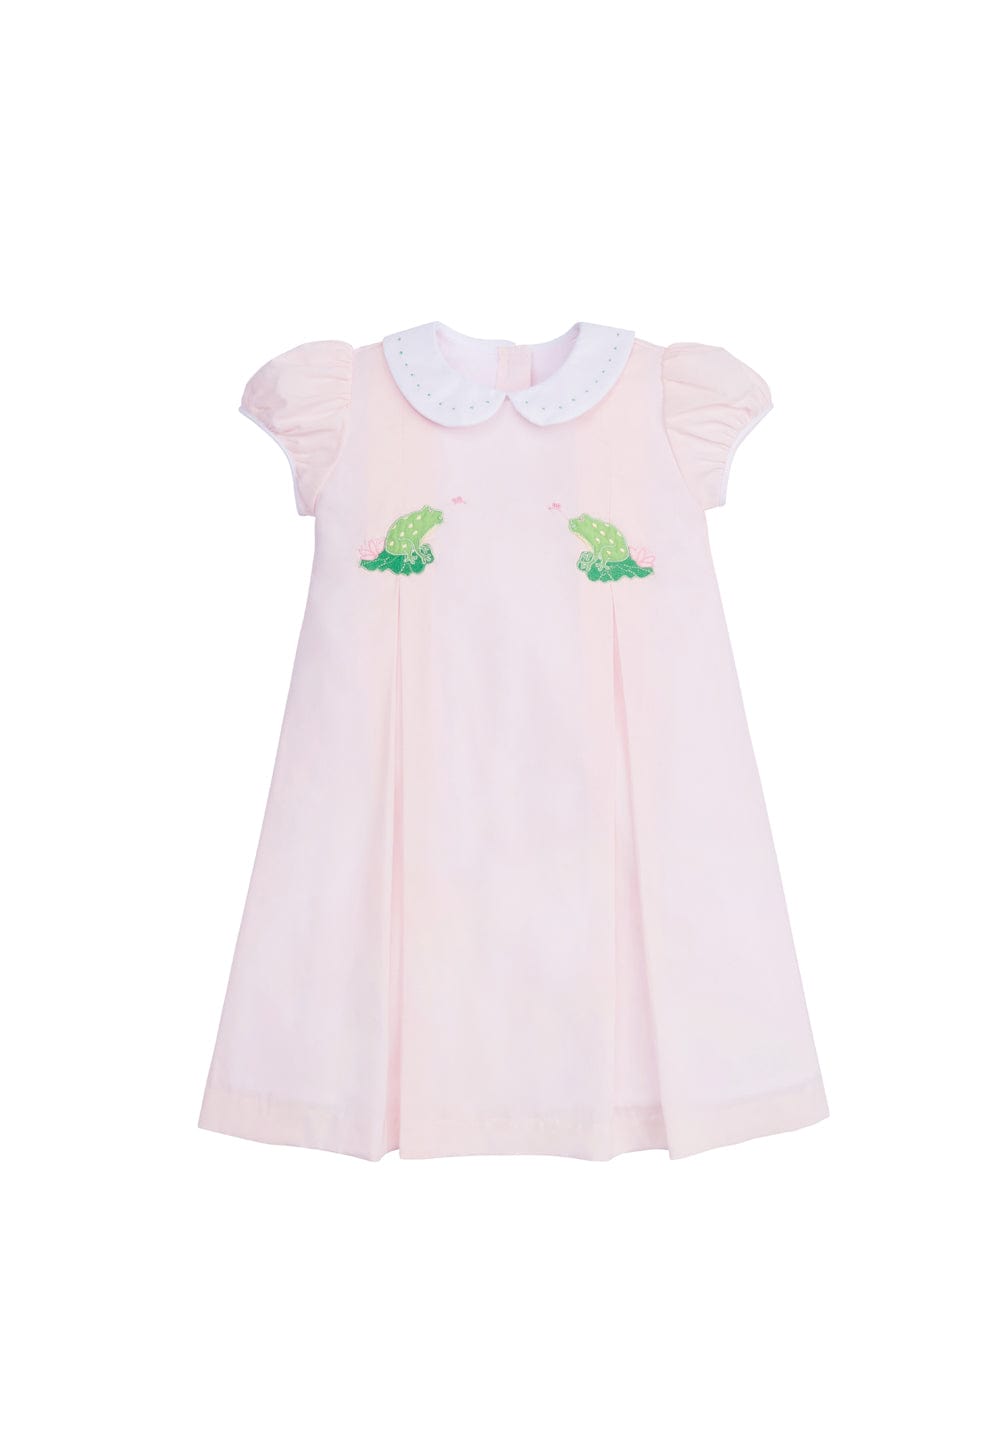 classic childrens clothing girls pink dress with peter pan collar and frog applique